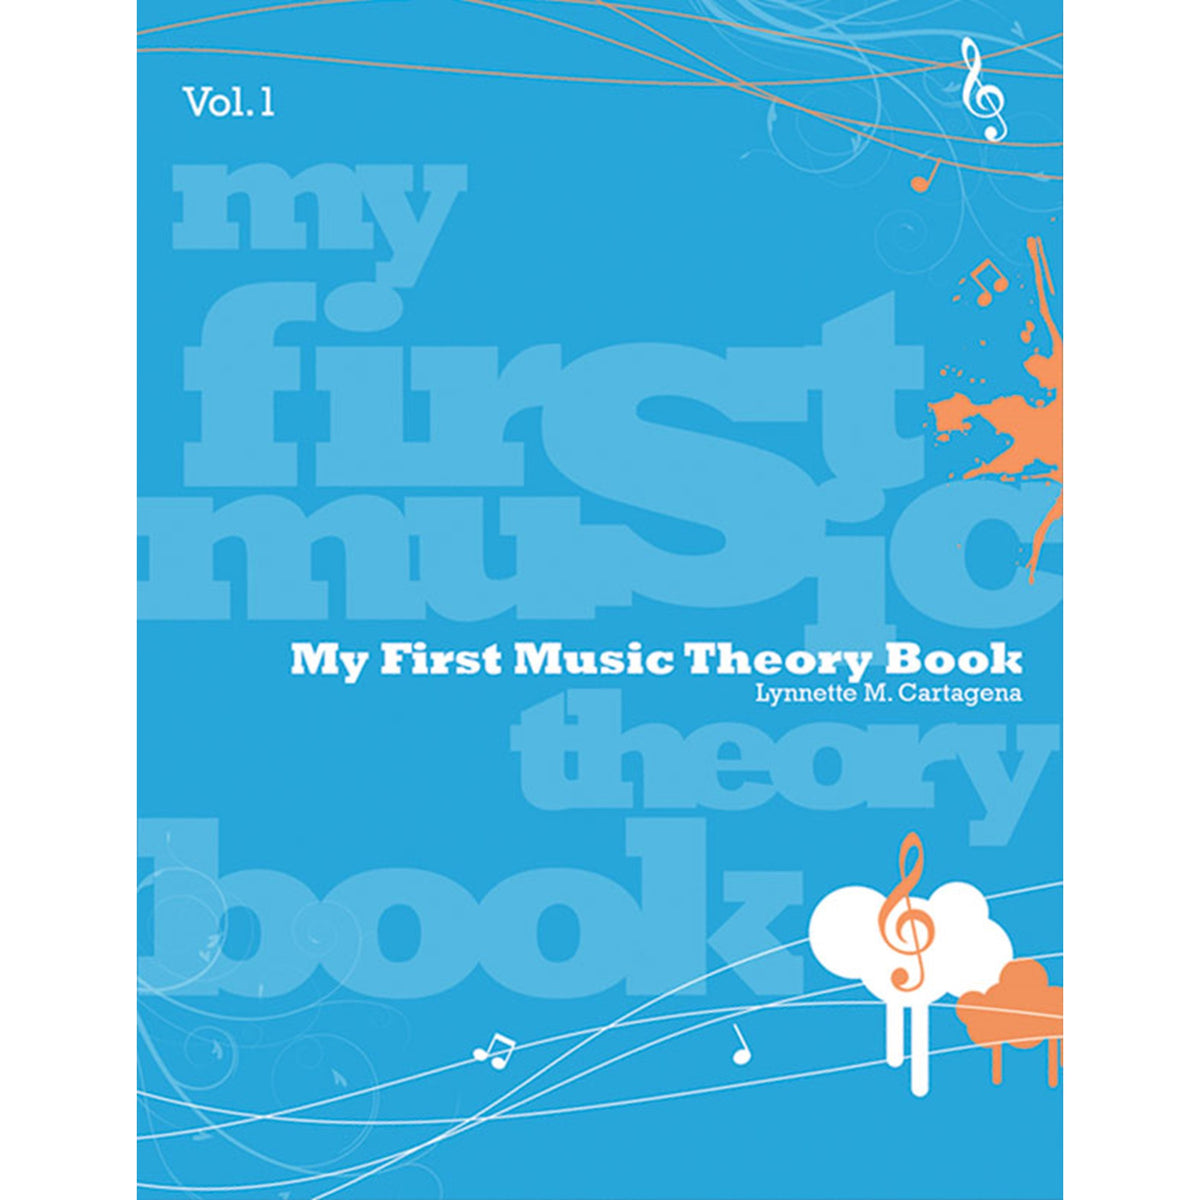 My First Music Theory Book, Volume 1